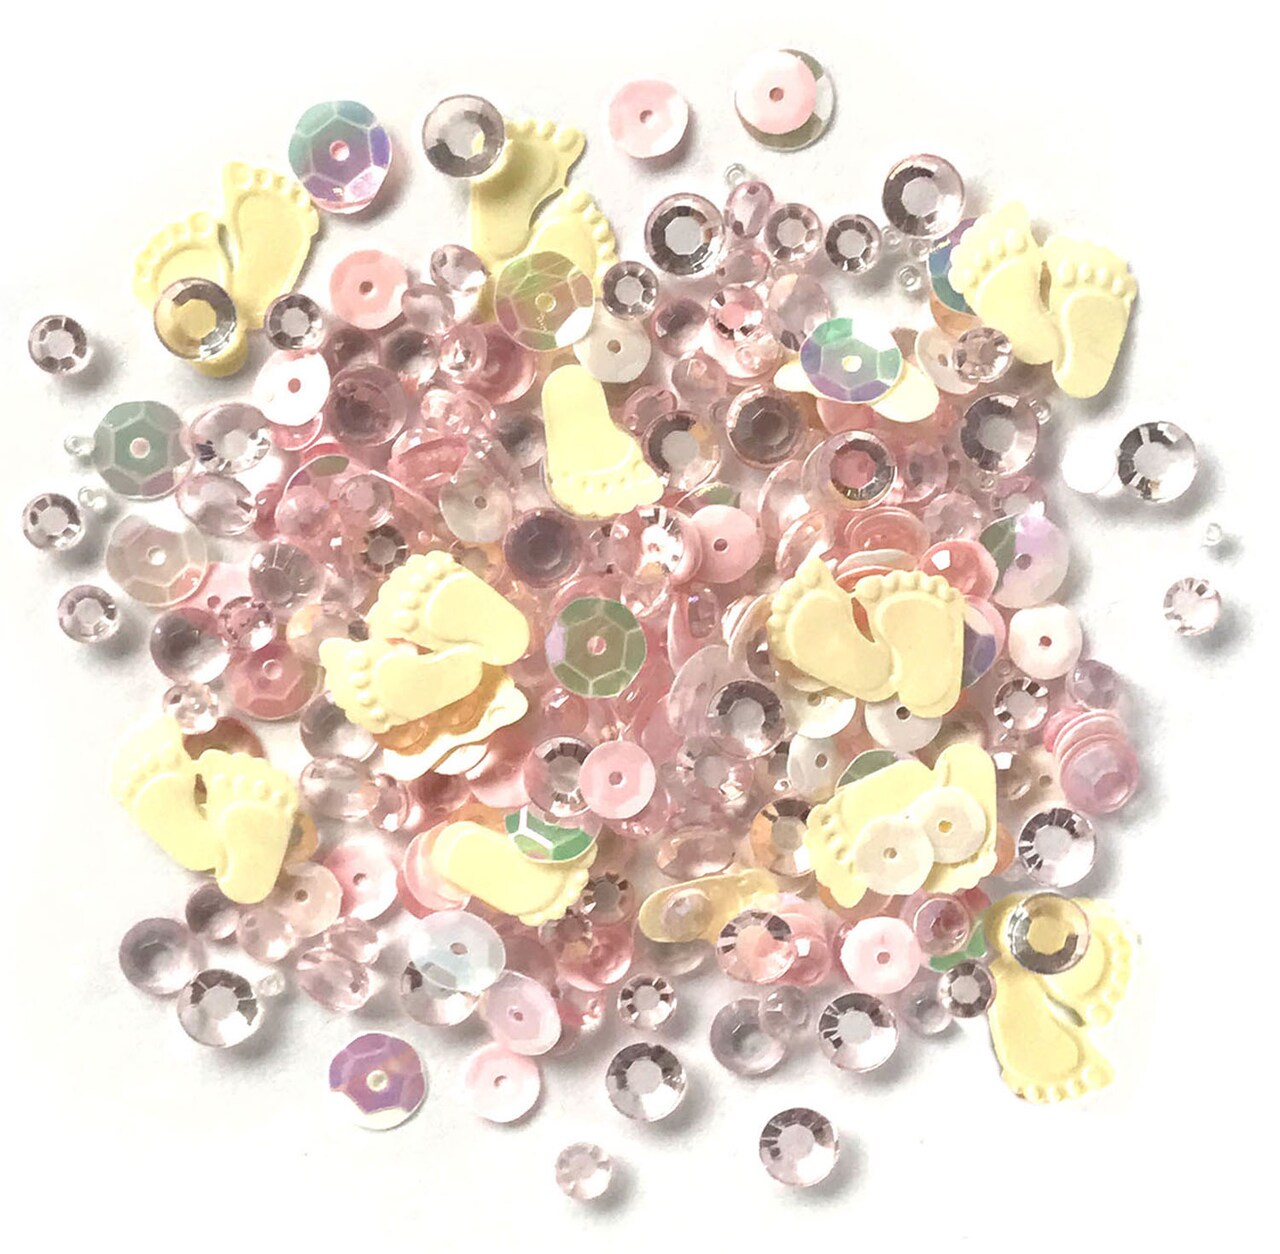 Buttons Galore Sparkletz DIY Craft Embellishments 30 Grams - 3 Packs of Daddy&#x27;s Little Girl